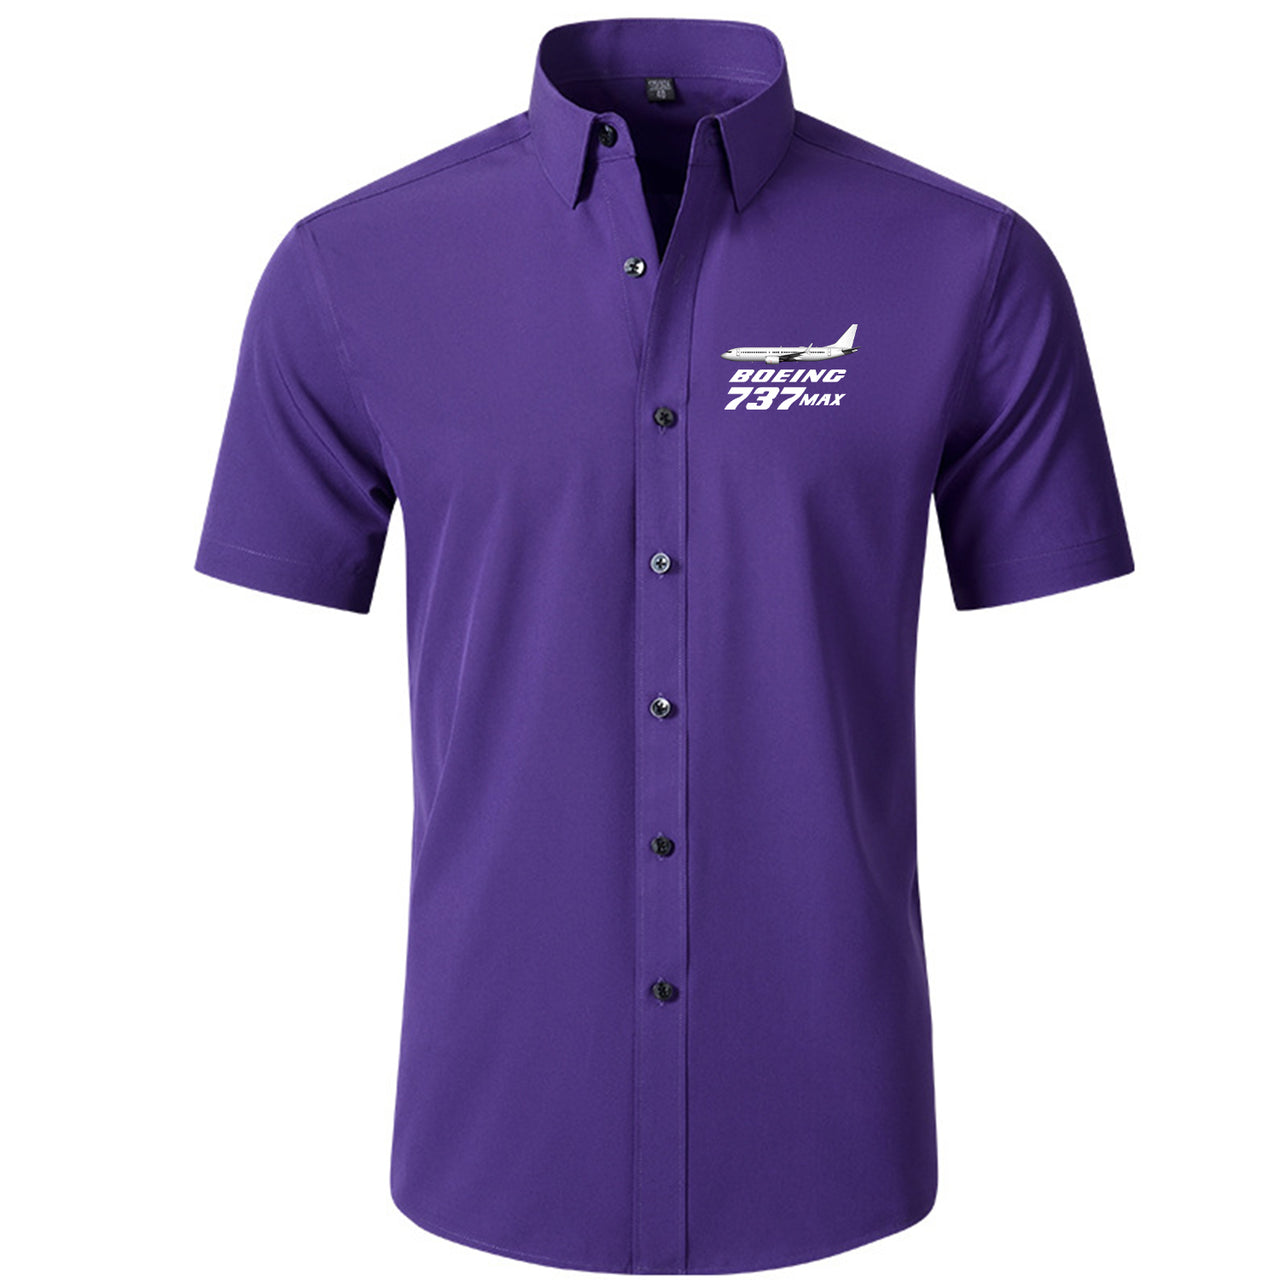 The Boeing 737Max Designed Short Sleeve Shirts